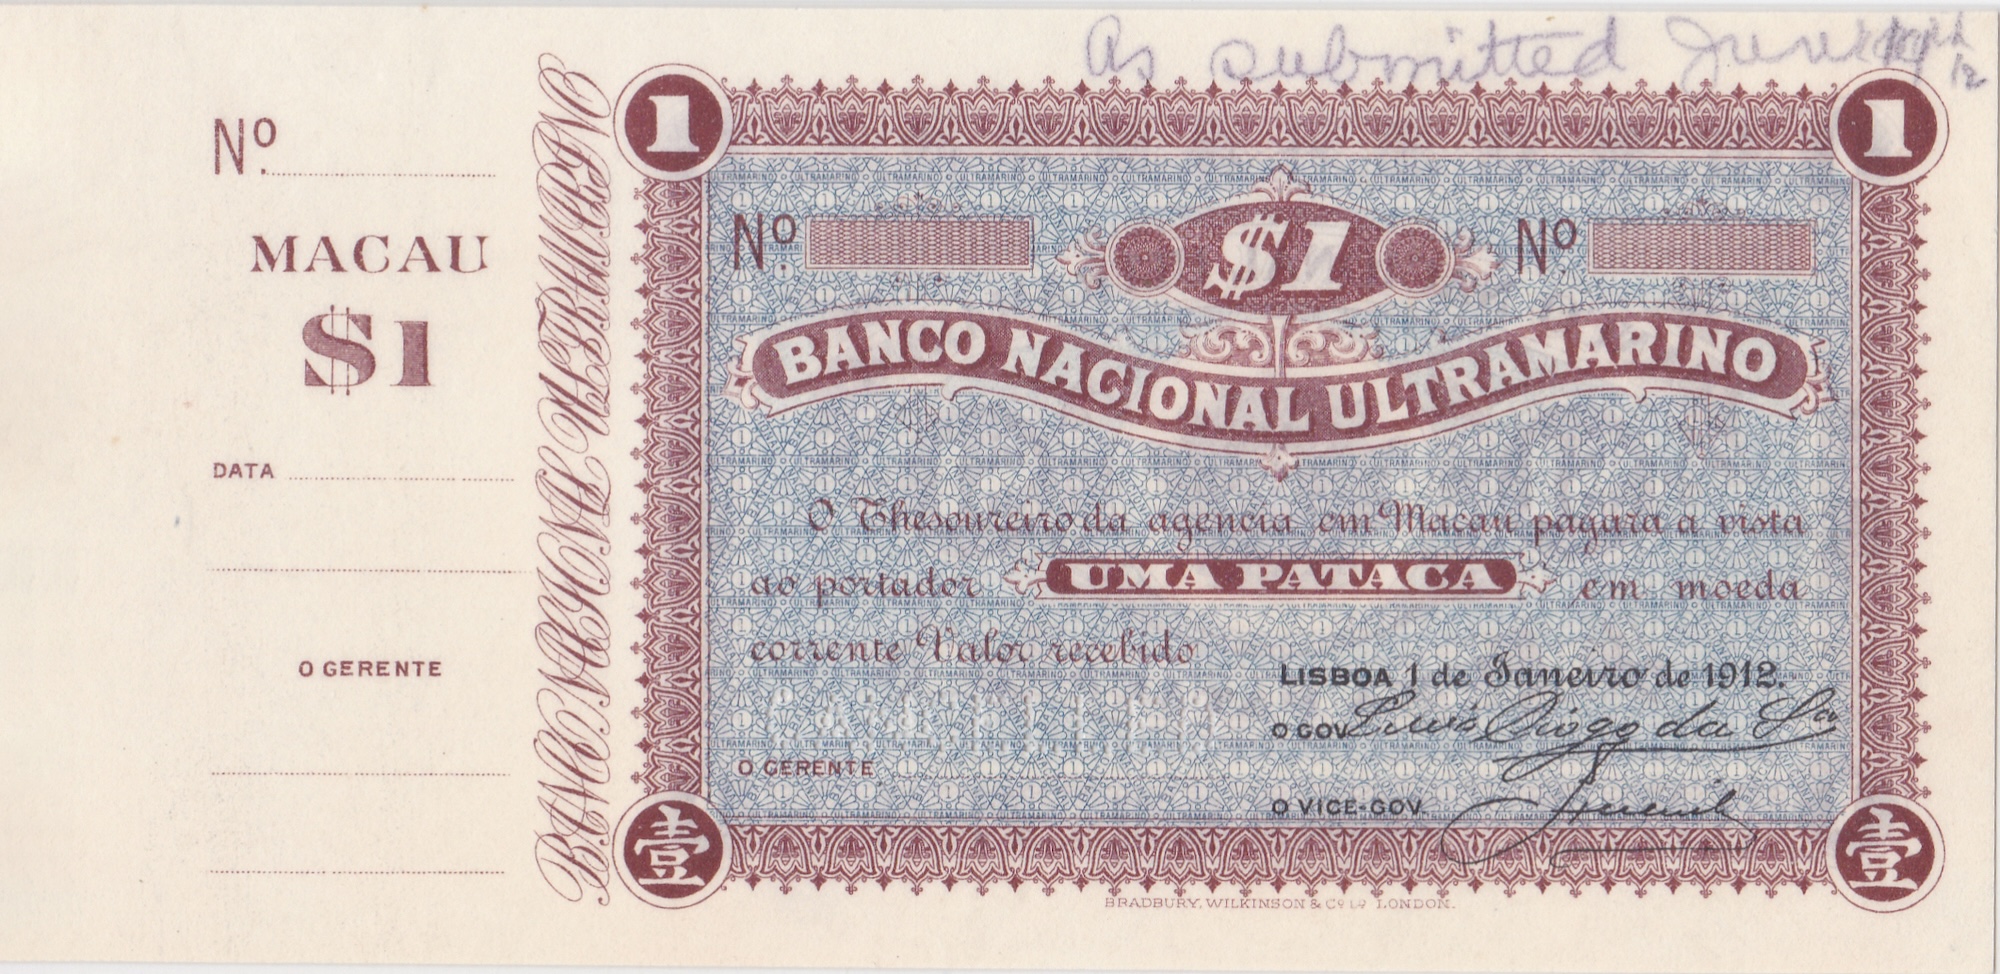 This one pataca banknote was issued by BNU in 1912